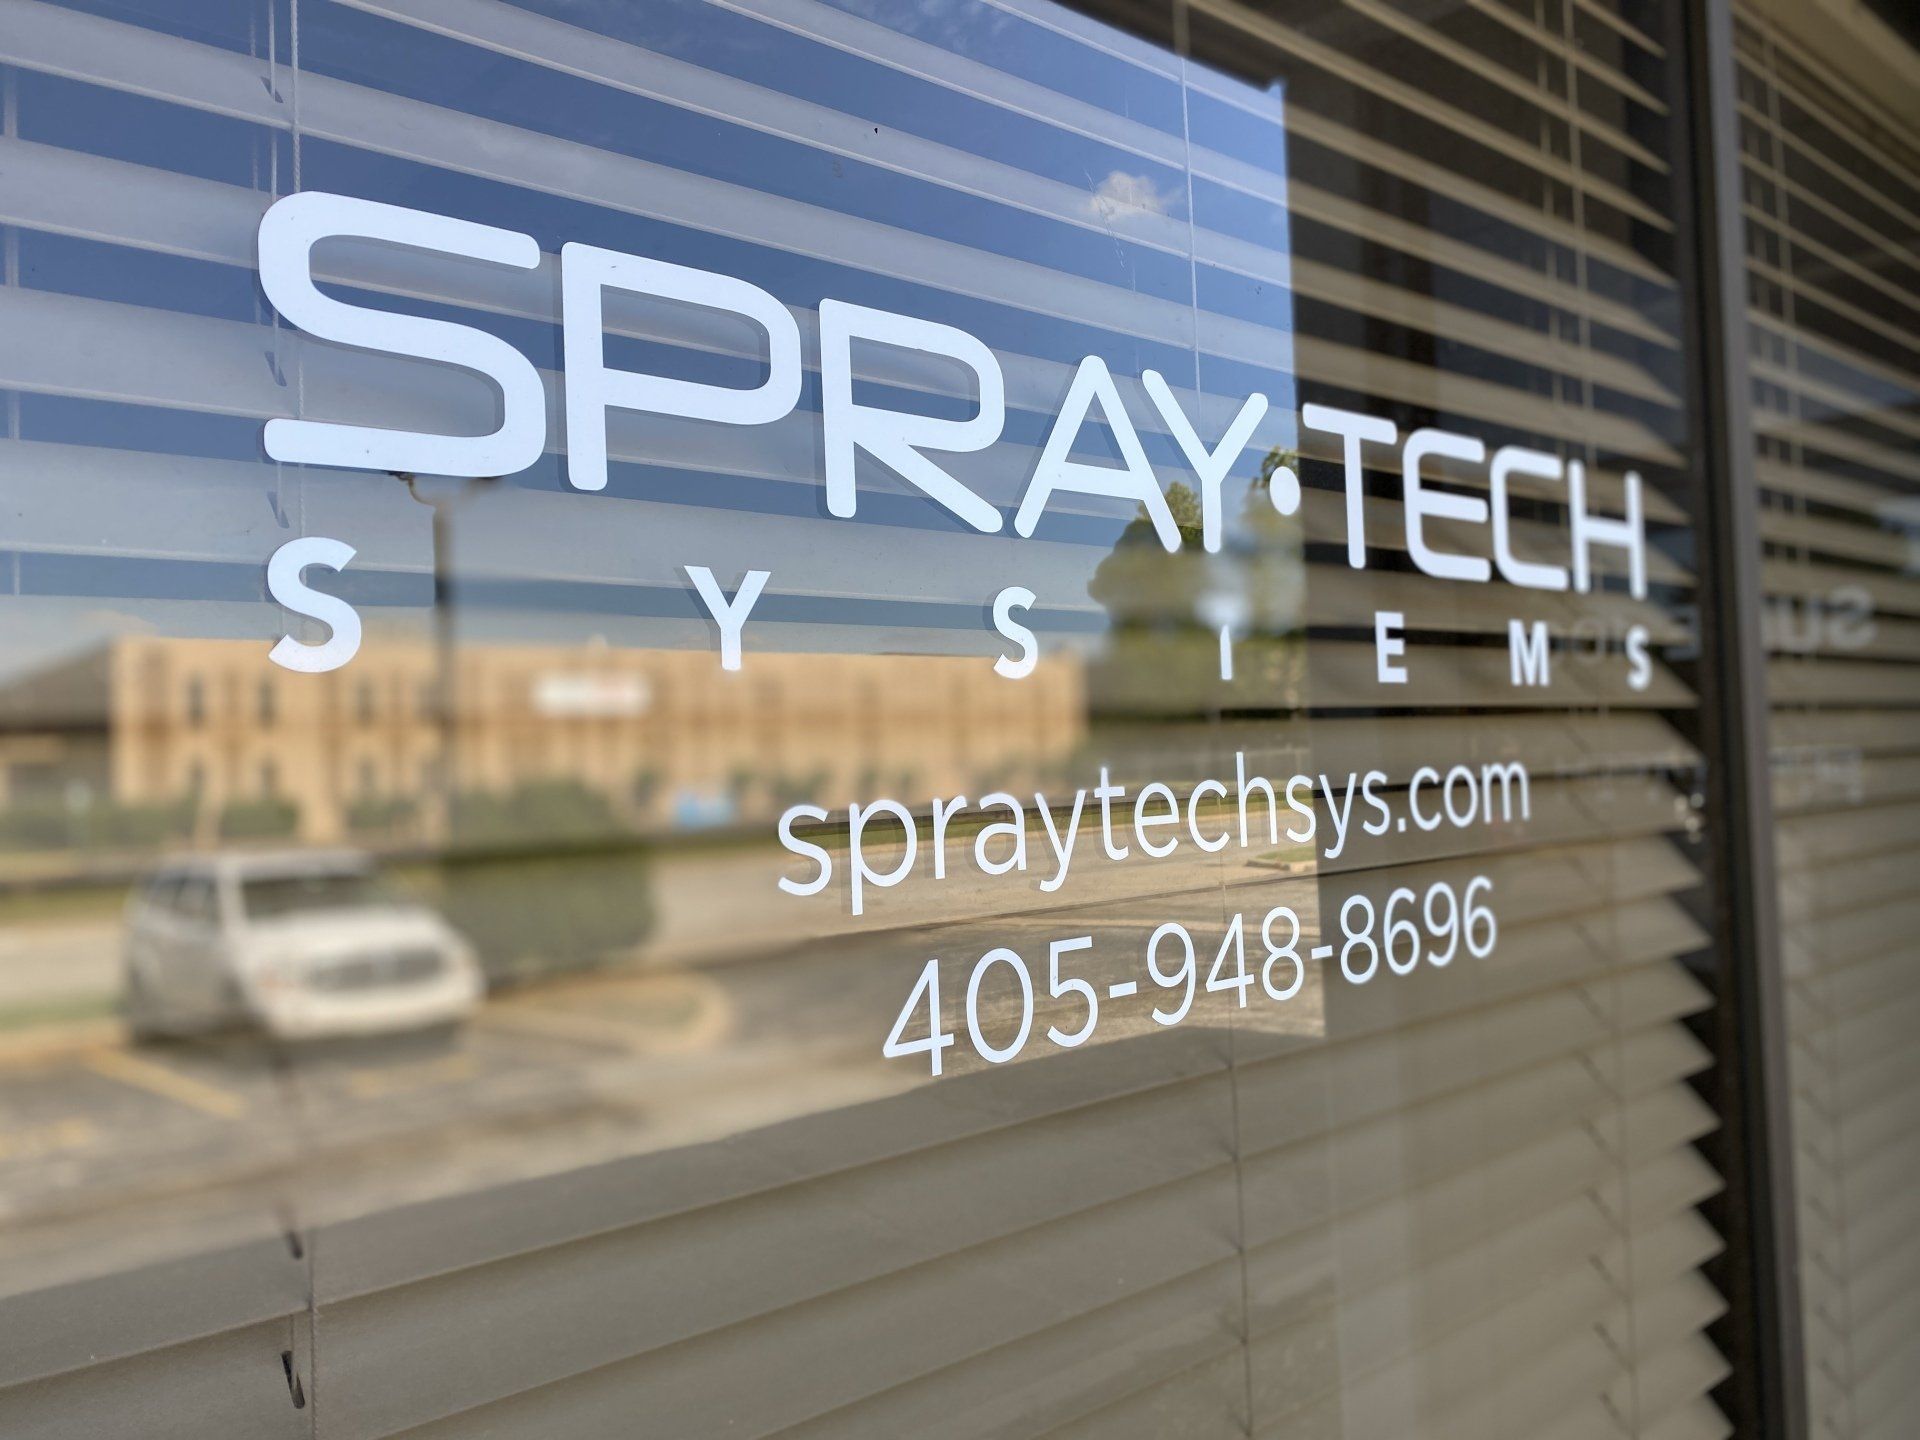 Spray Tech Liquid and Powder Coating Equipment Industrial Supplier Relocation